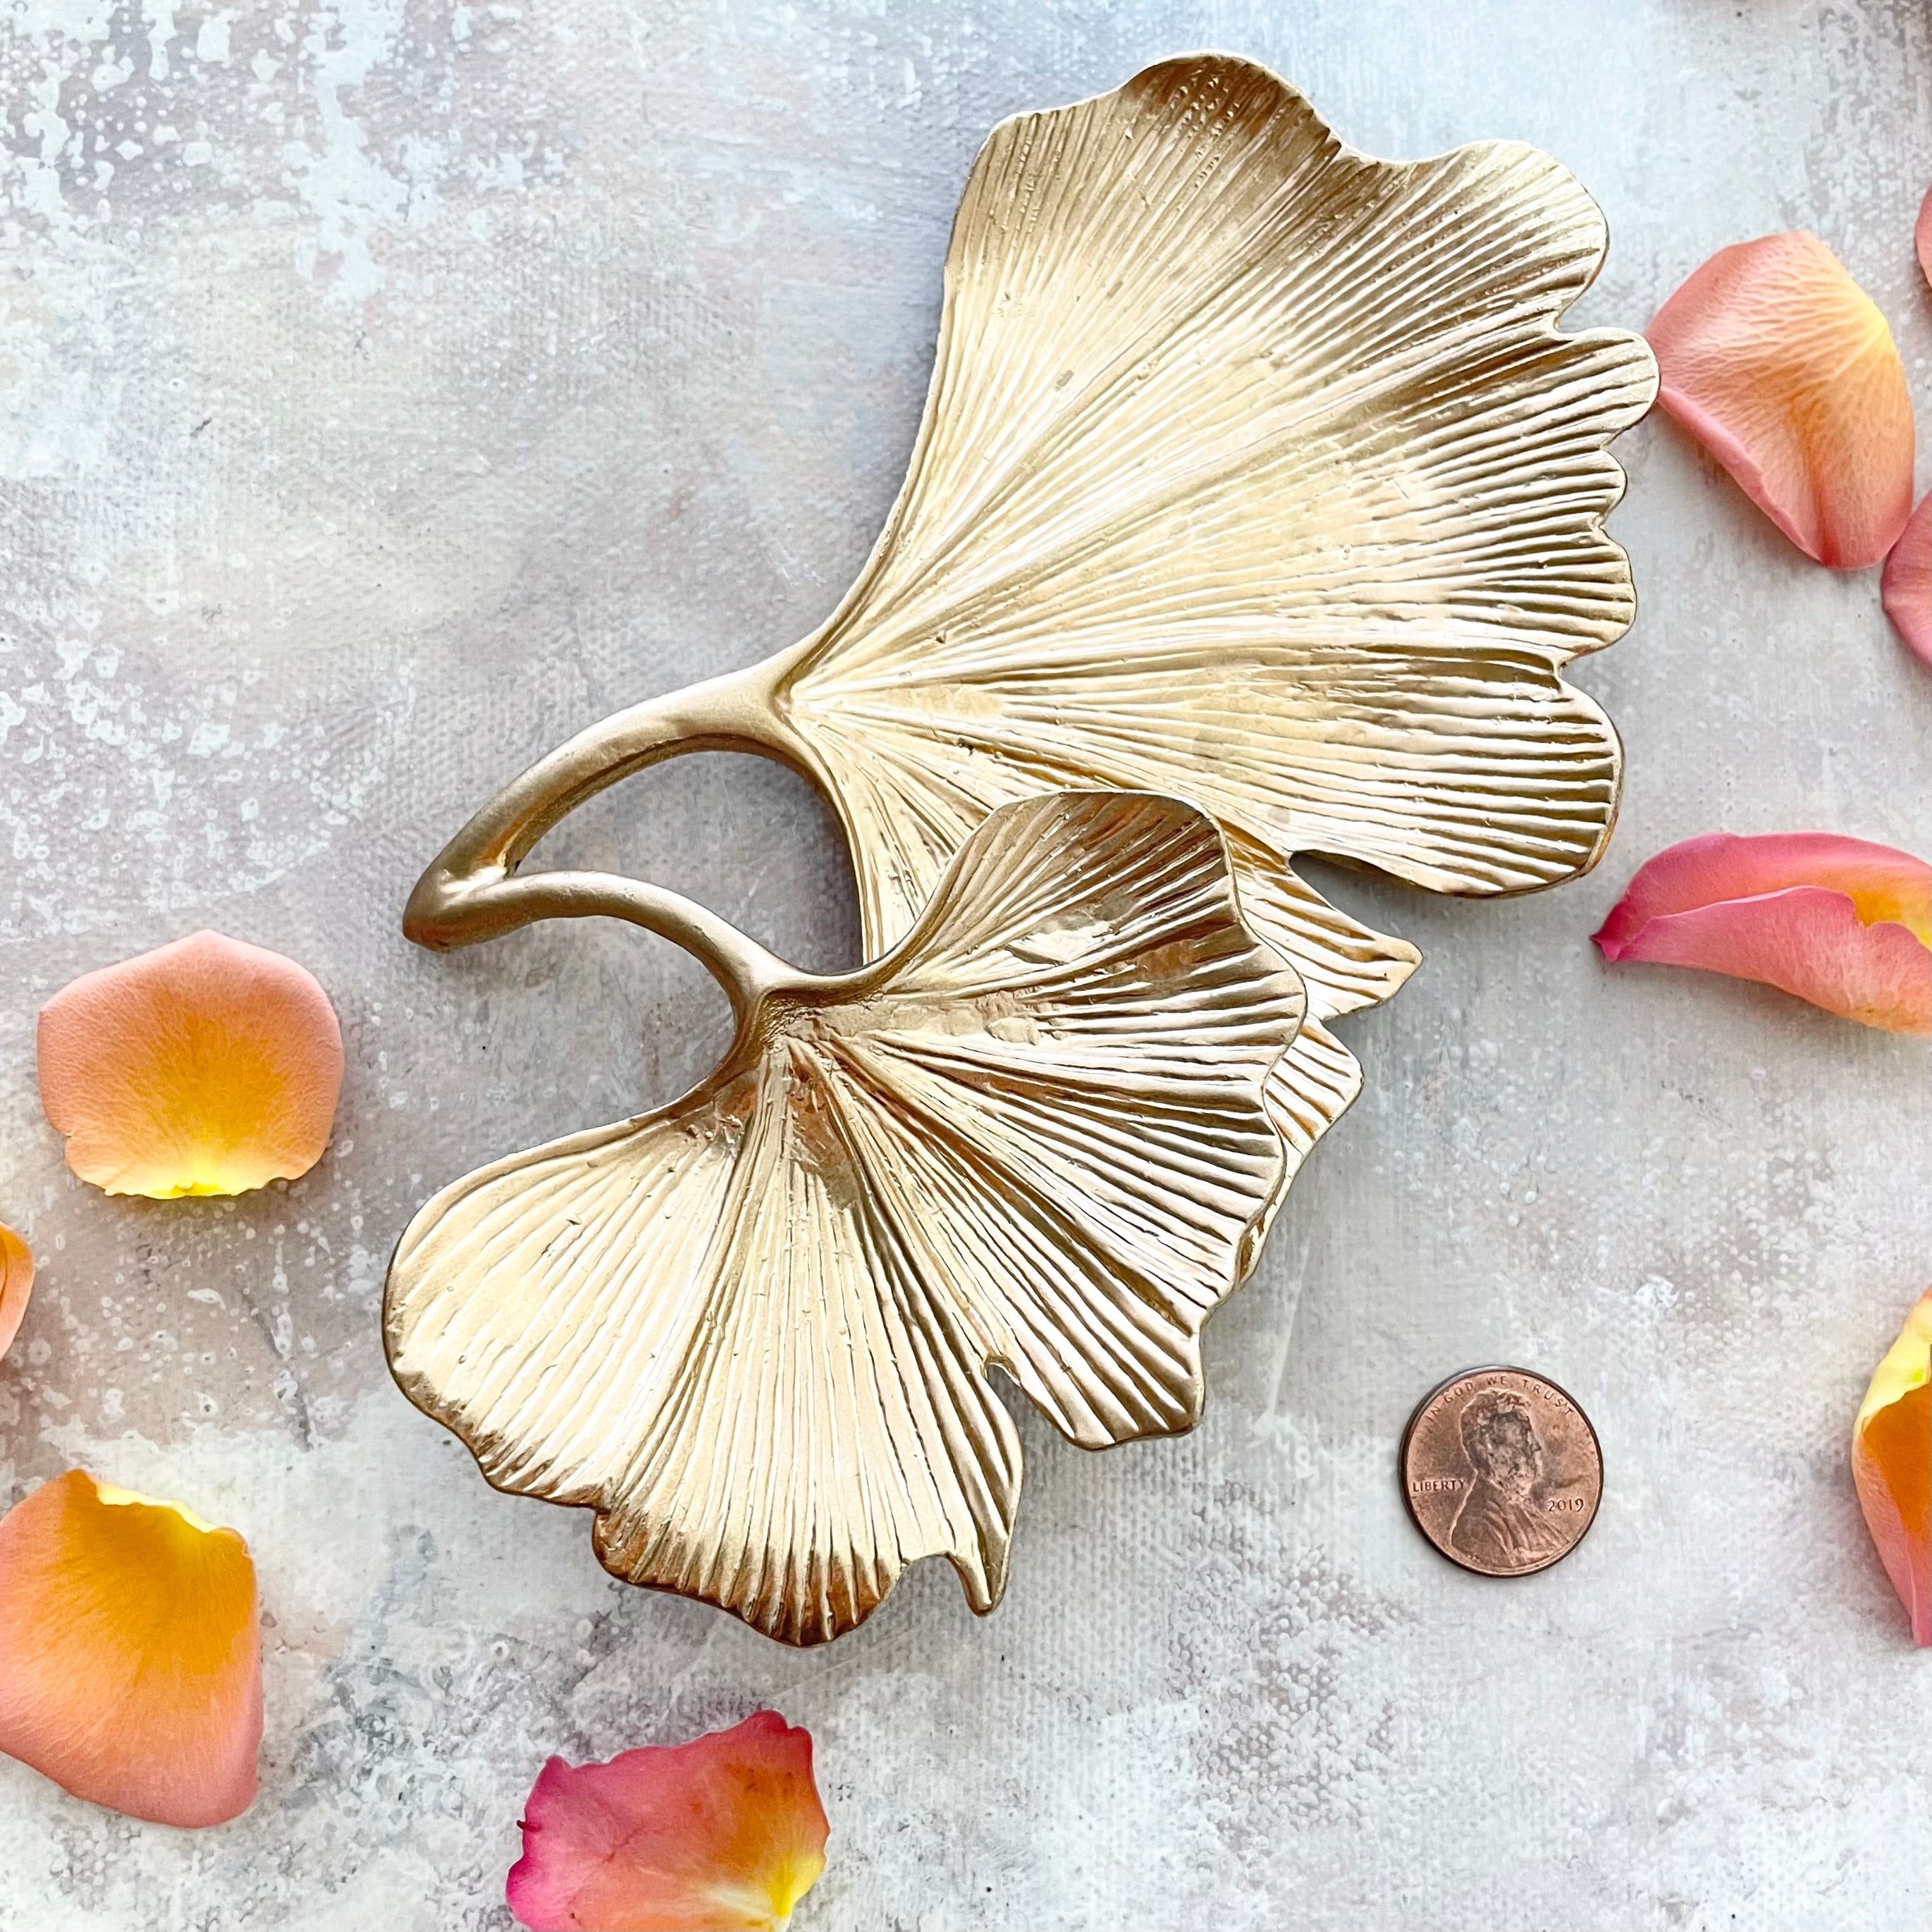 Ginkgo Leaf Gold Styling Tray styled floral petals and one cooper penny - Flat Lay Props from Champagne & GRIT